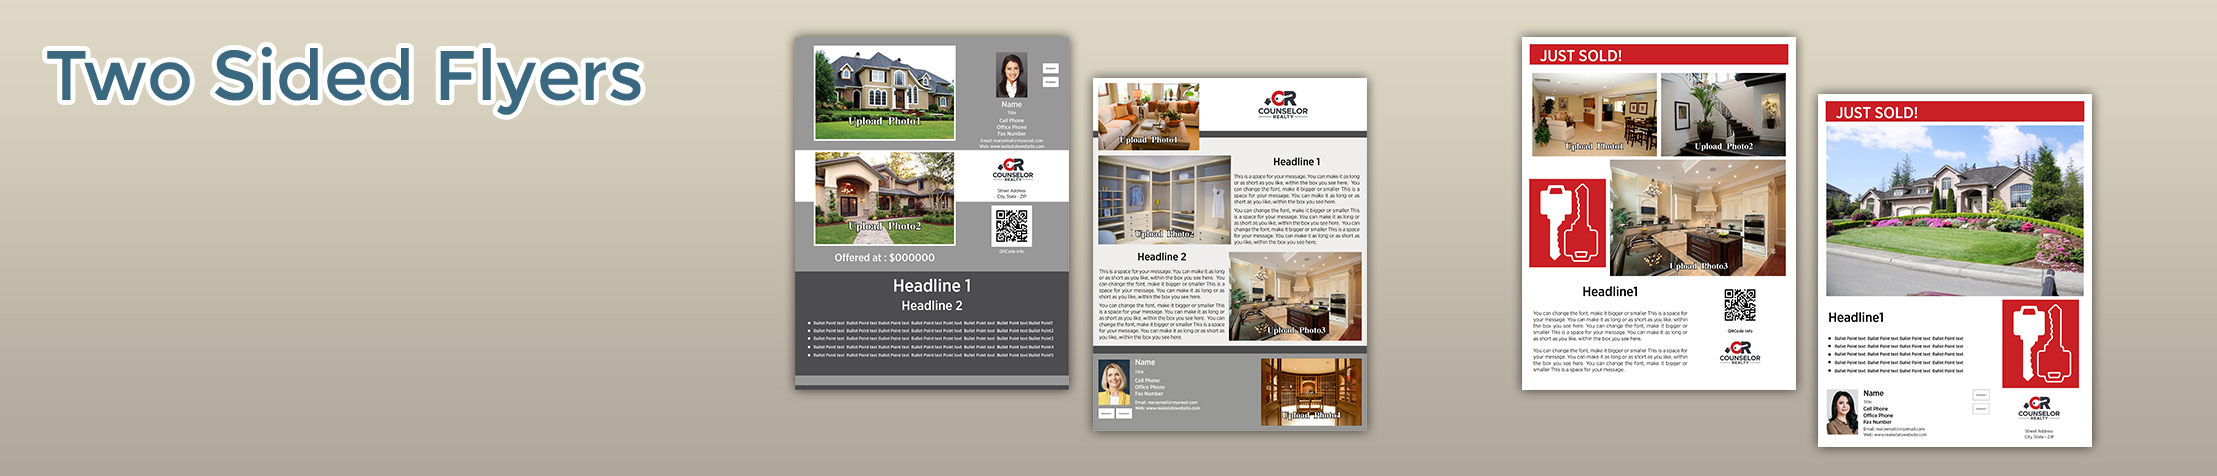 Counselor Realty Real Estate Flyers and Brochures - Counselor Realty two-sided flyer templates for open houses and marketing | BestPrintBuy.com